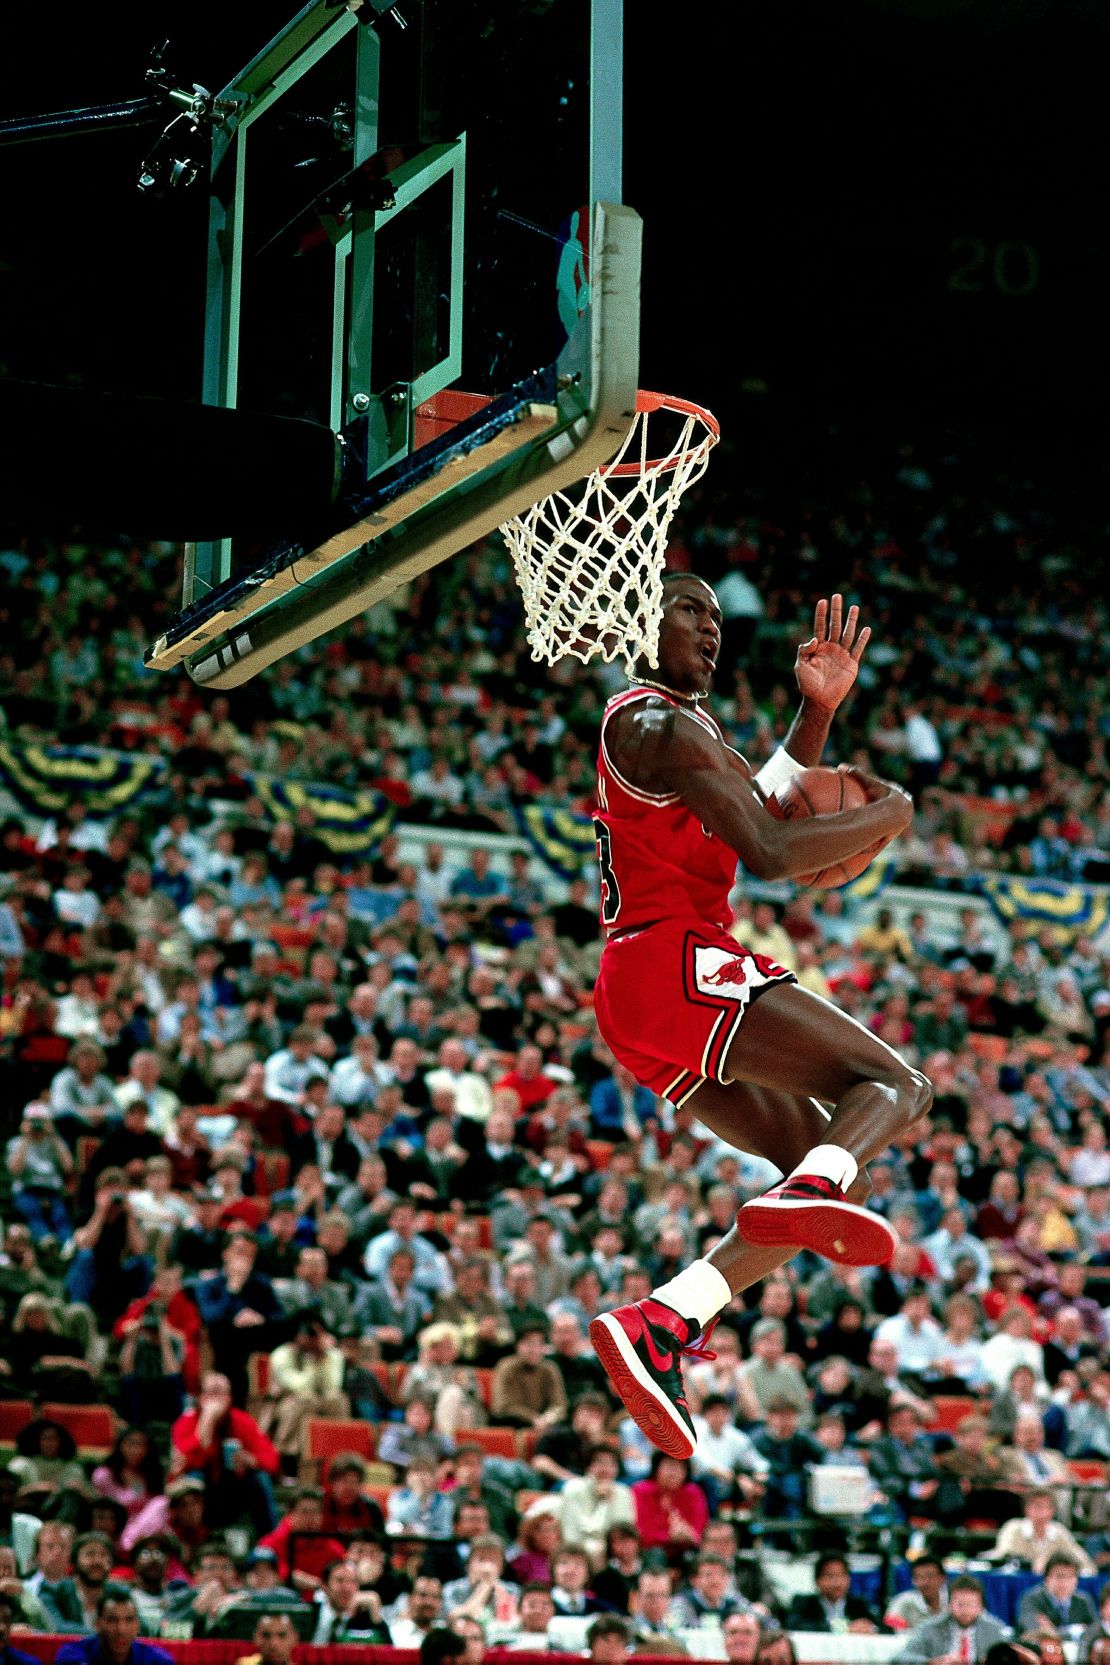 Jordan at the 1985 NBA All Star Slam Dunk Competition.